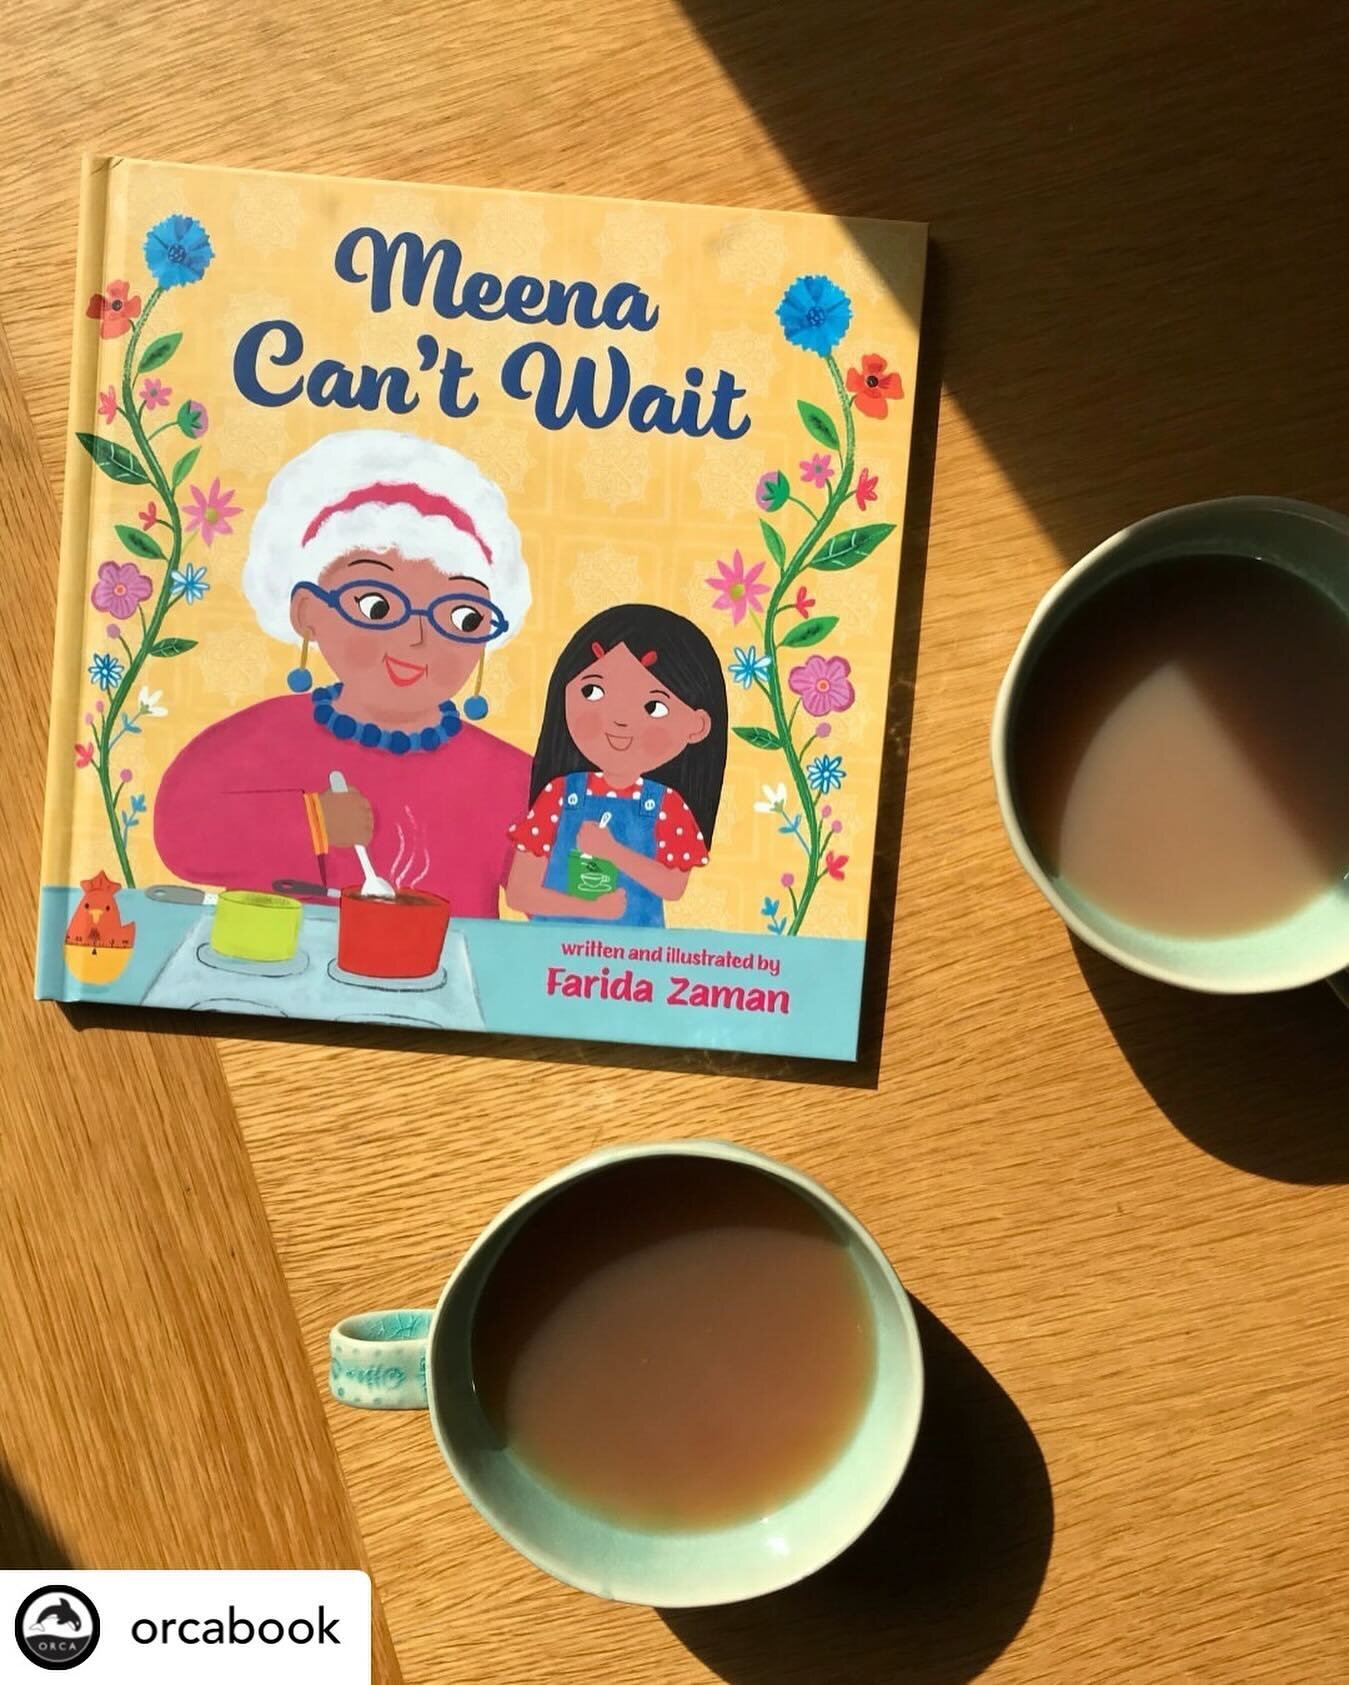 @orcabook &ldquo;When I was a little girl, I used to make doodh cha just like this,&rdquo; says Nanu. &ldquo;But that was a very long time ago and in a very different kitchen.&rdquo; 

In MEENA CAN&rsquo;T WAIT, Meena helps her nanu make a special Be